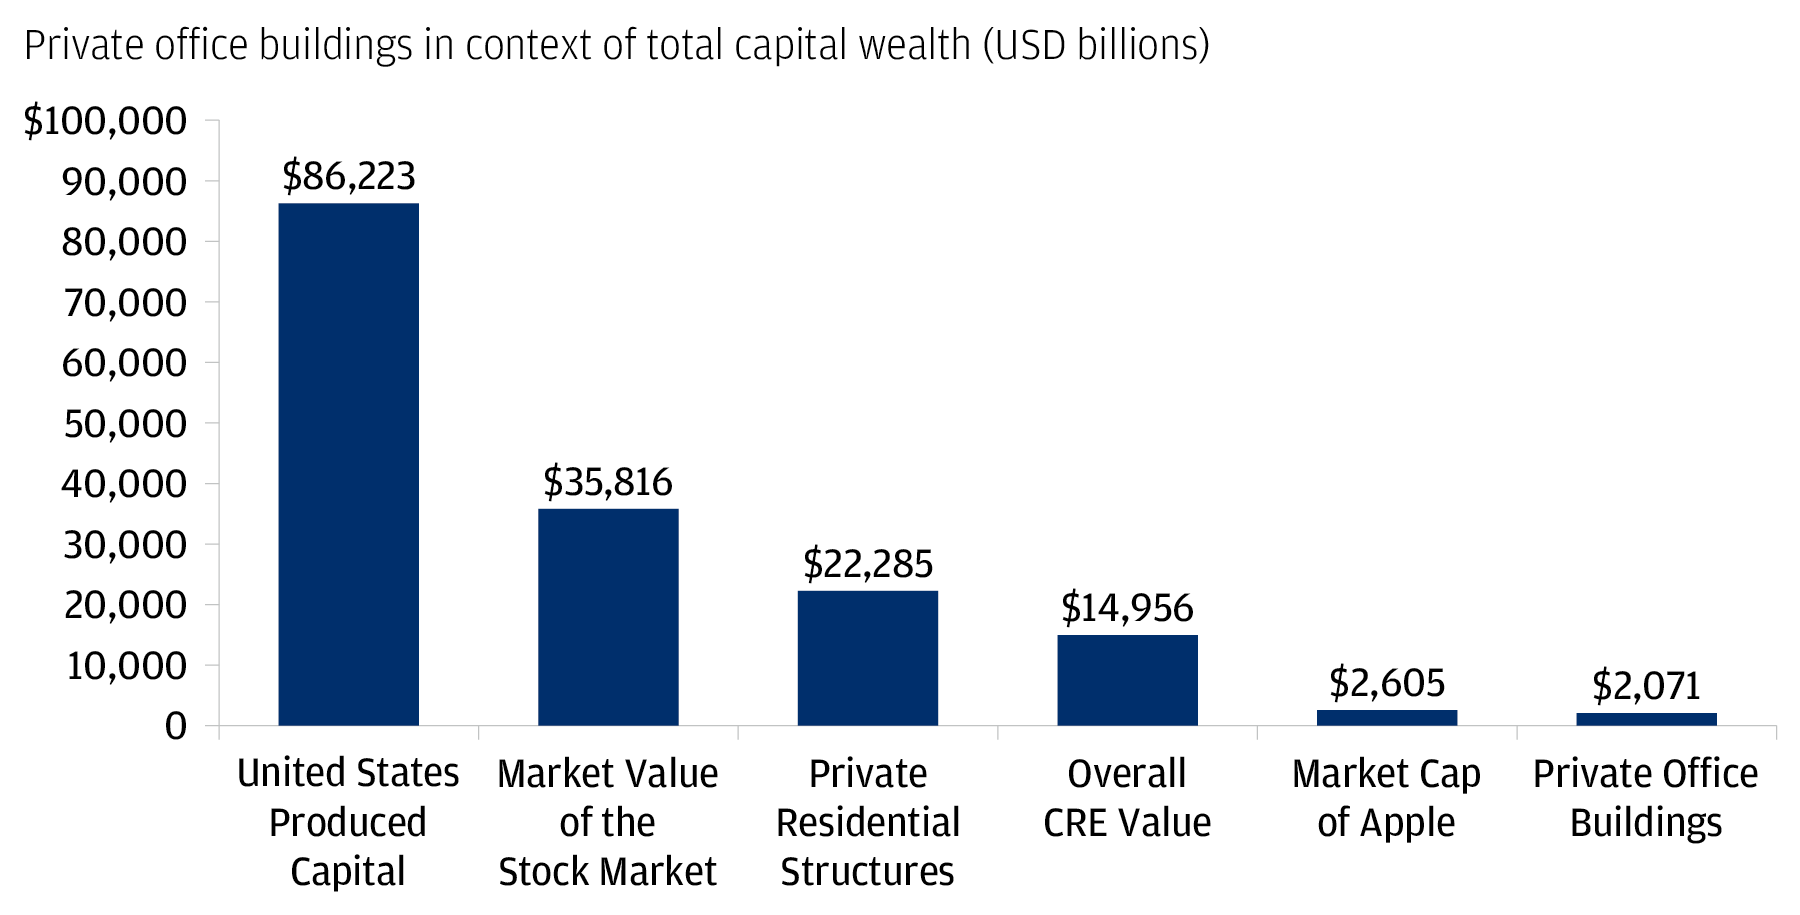 The private office market represents a fraction of total capital wealth in the U.S.